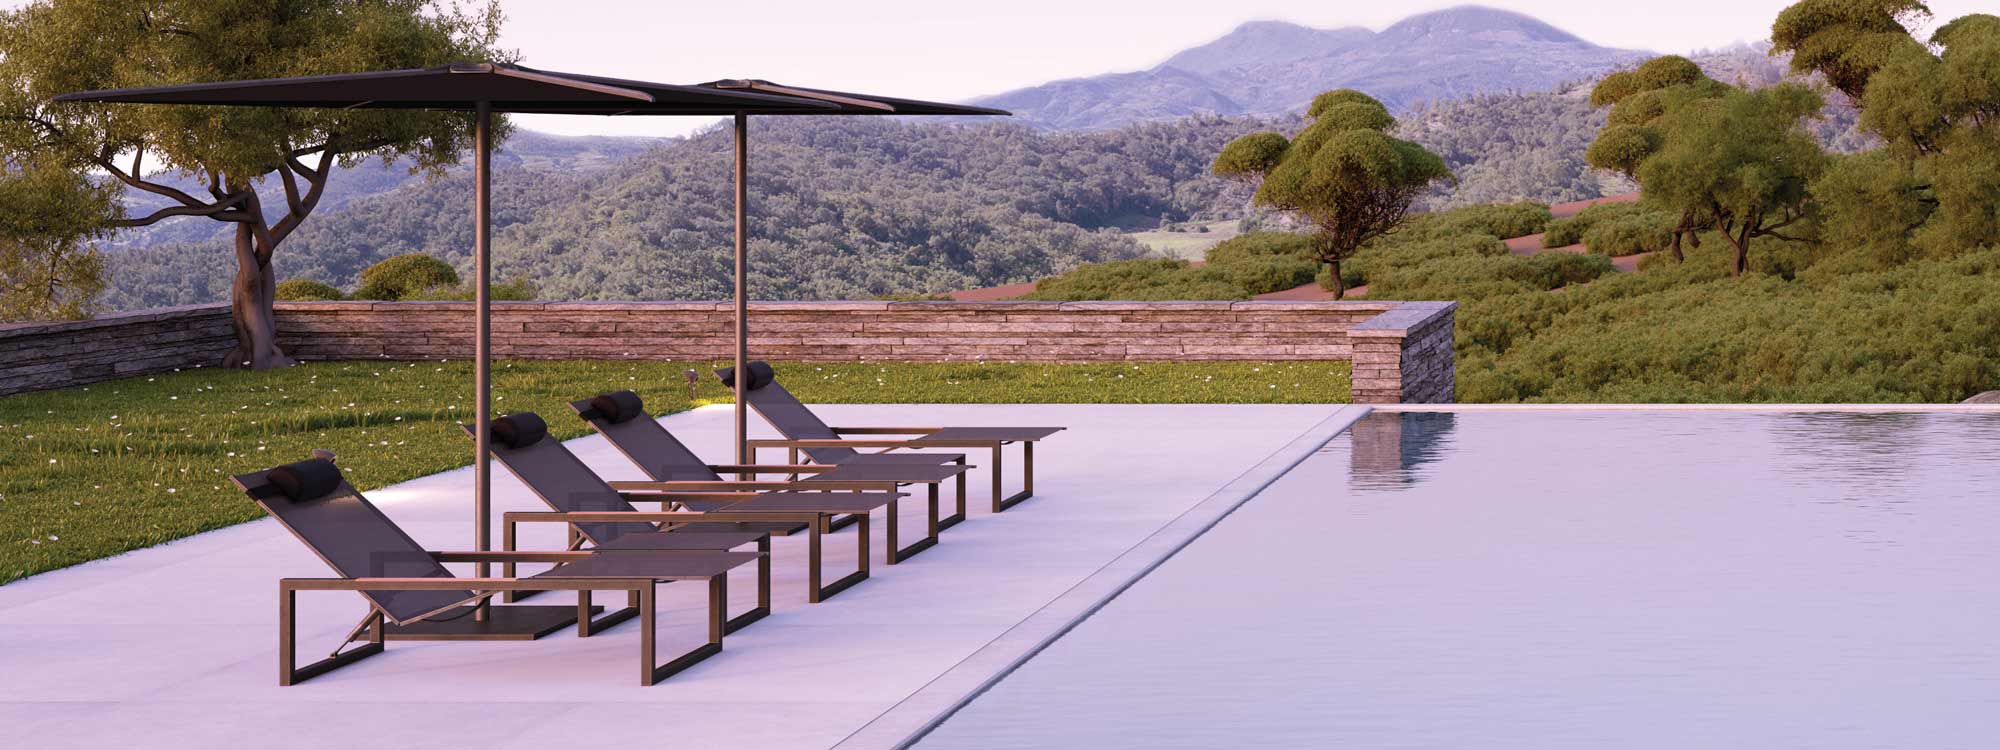 Royal Botania outdoor furniture collection includes the iconic Ninix sun lounger, shown here with the chic Oazz parasol.